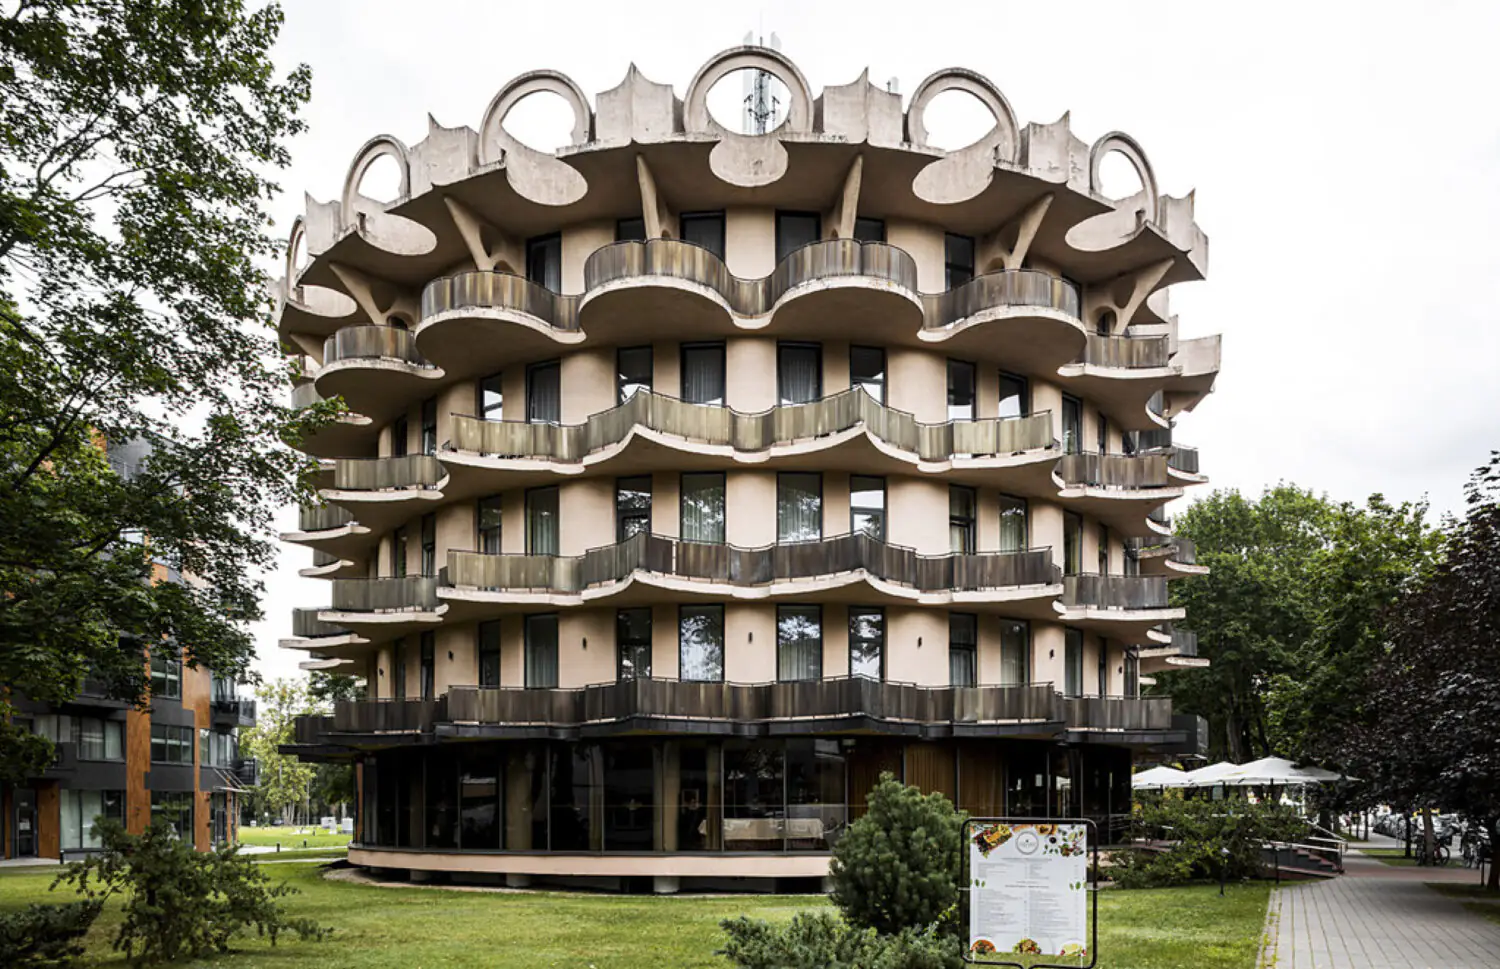 Churches, Hotels, Castles on the E11 Path: Fifteen Architectural Highlights of the Baltics